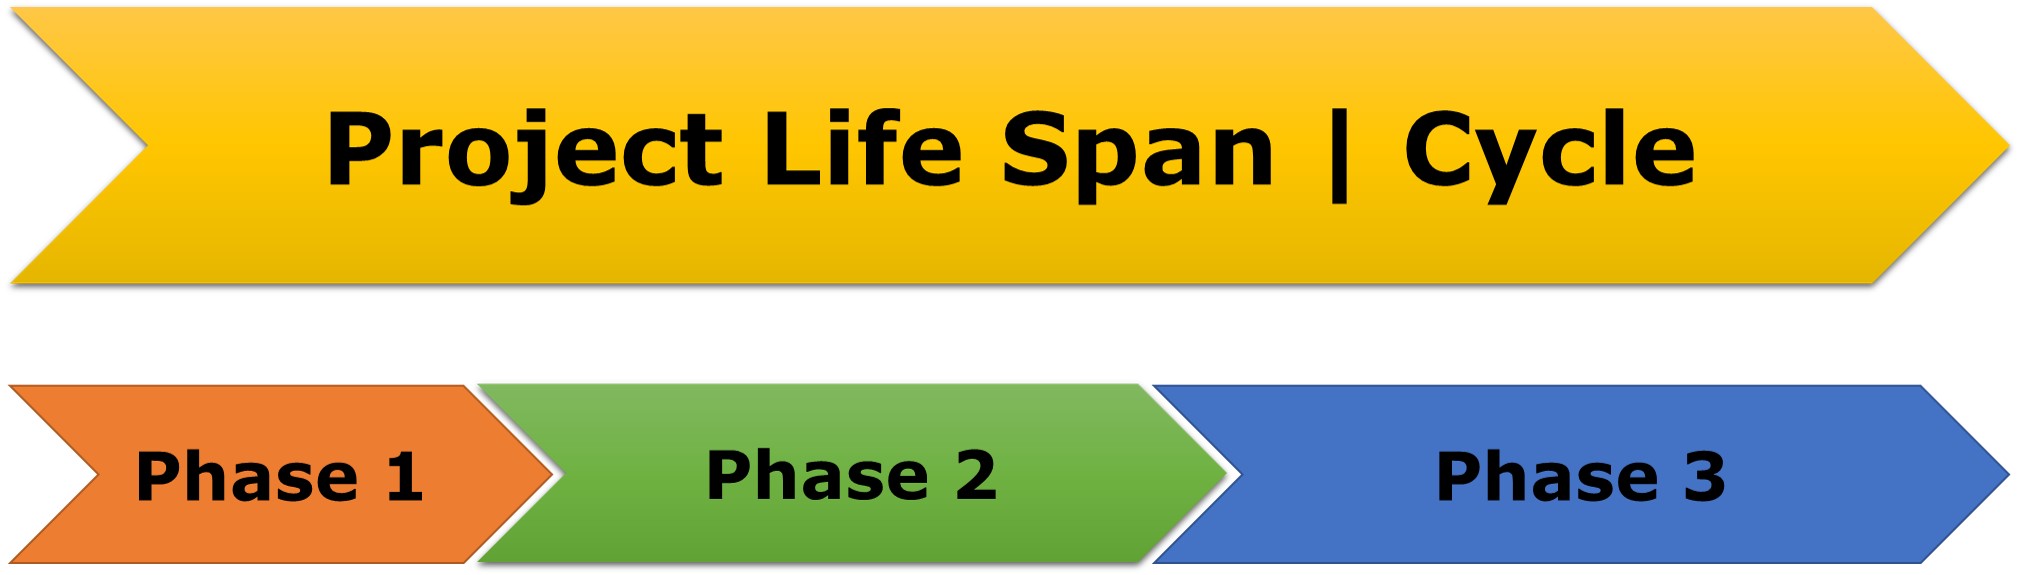 typical-project-life-cycle